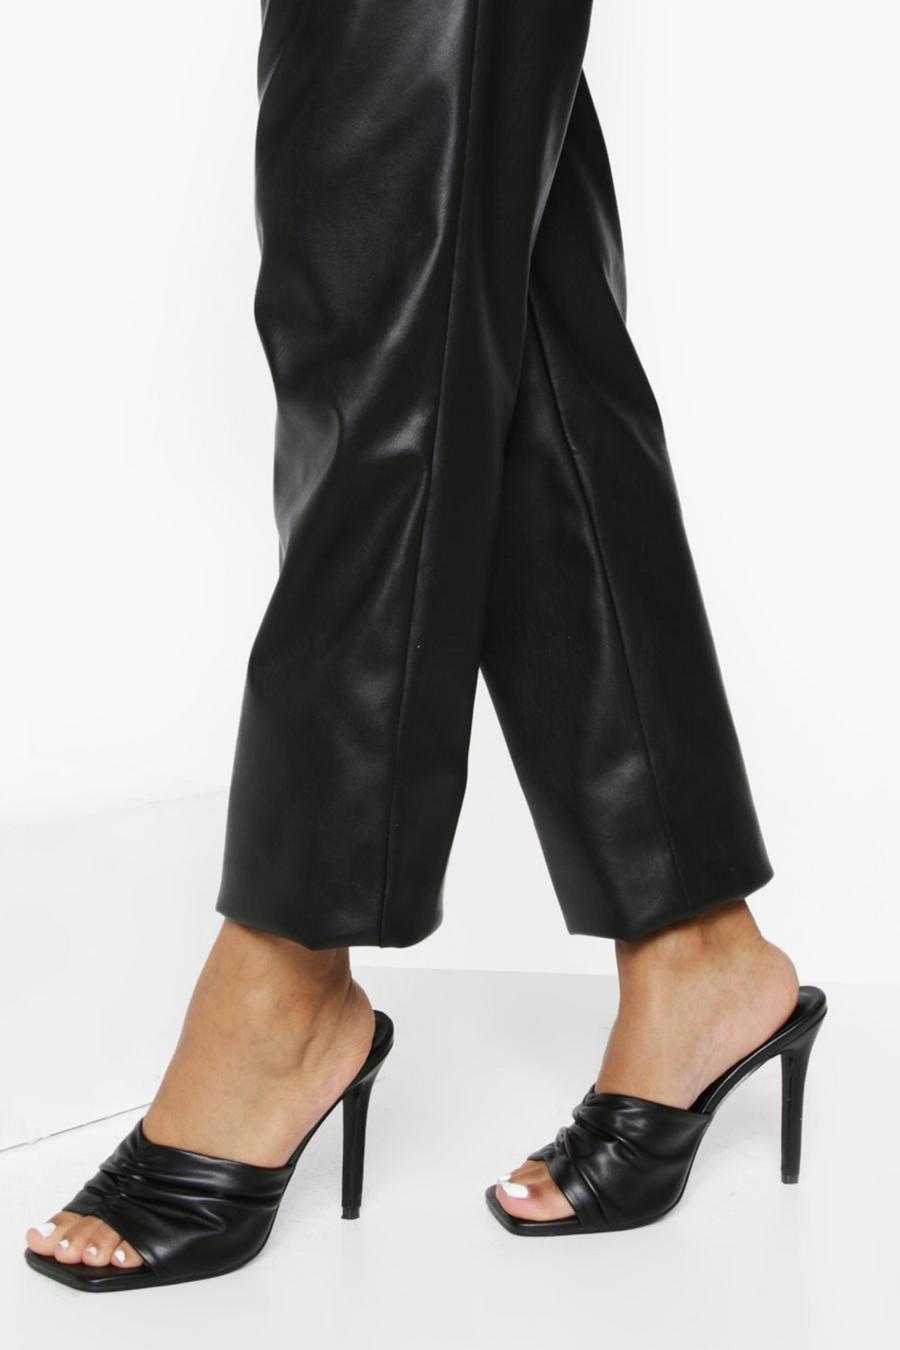 Black Ruched Front Heeled Mule